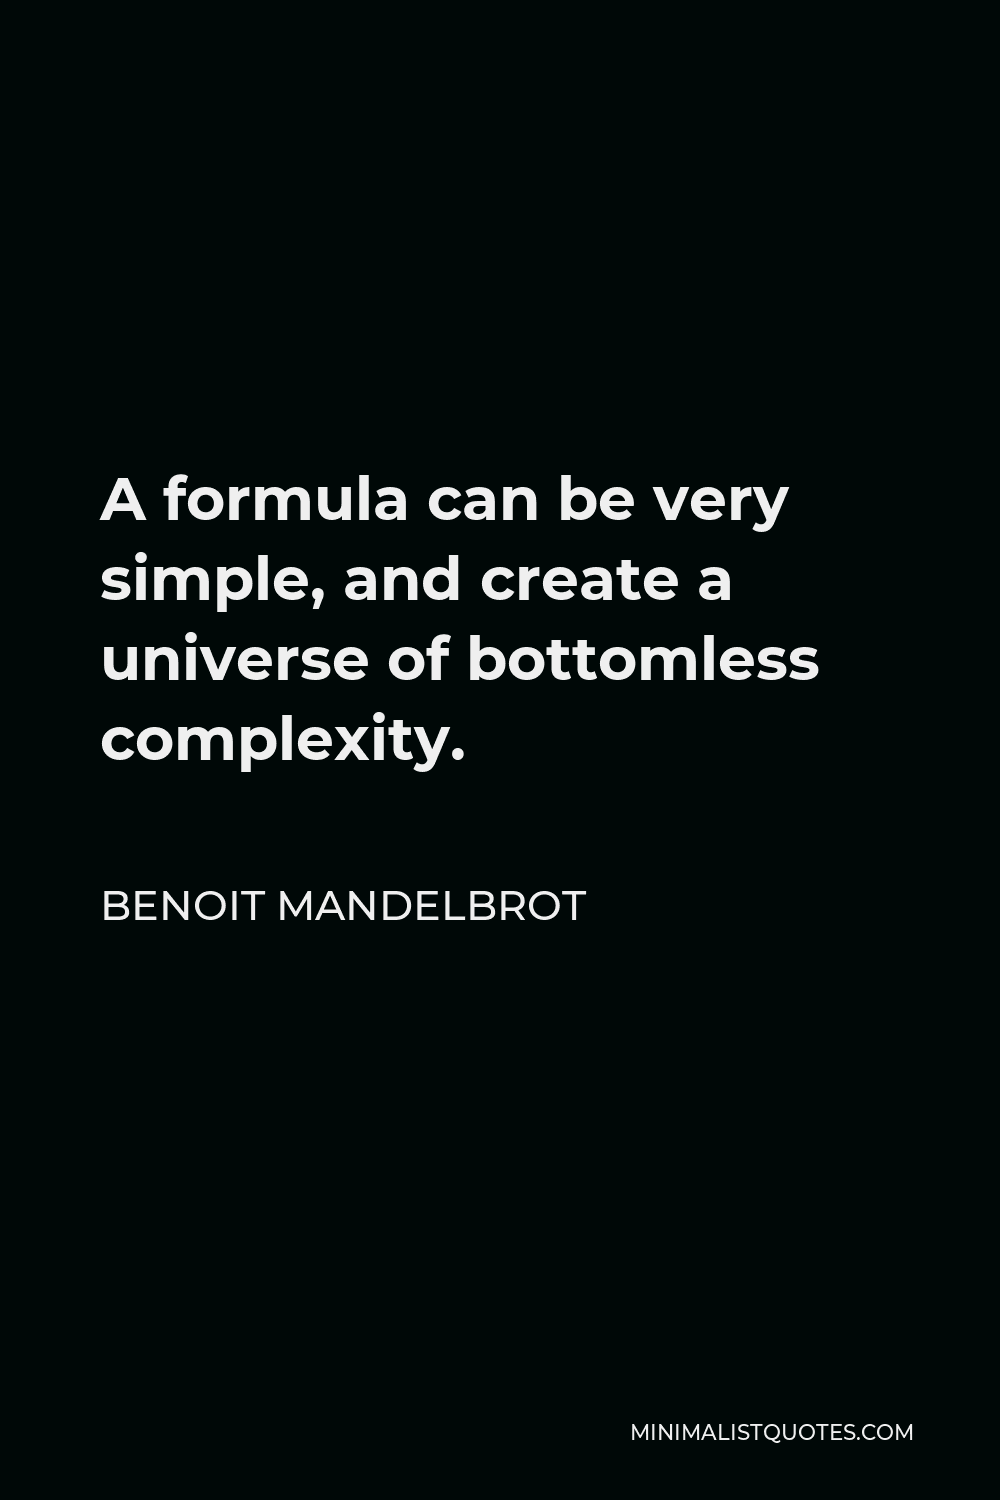 Benoit Mandelbrot Quote - A formula can be very simple, and create a universe of bottomless complexity.